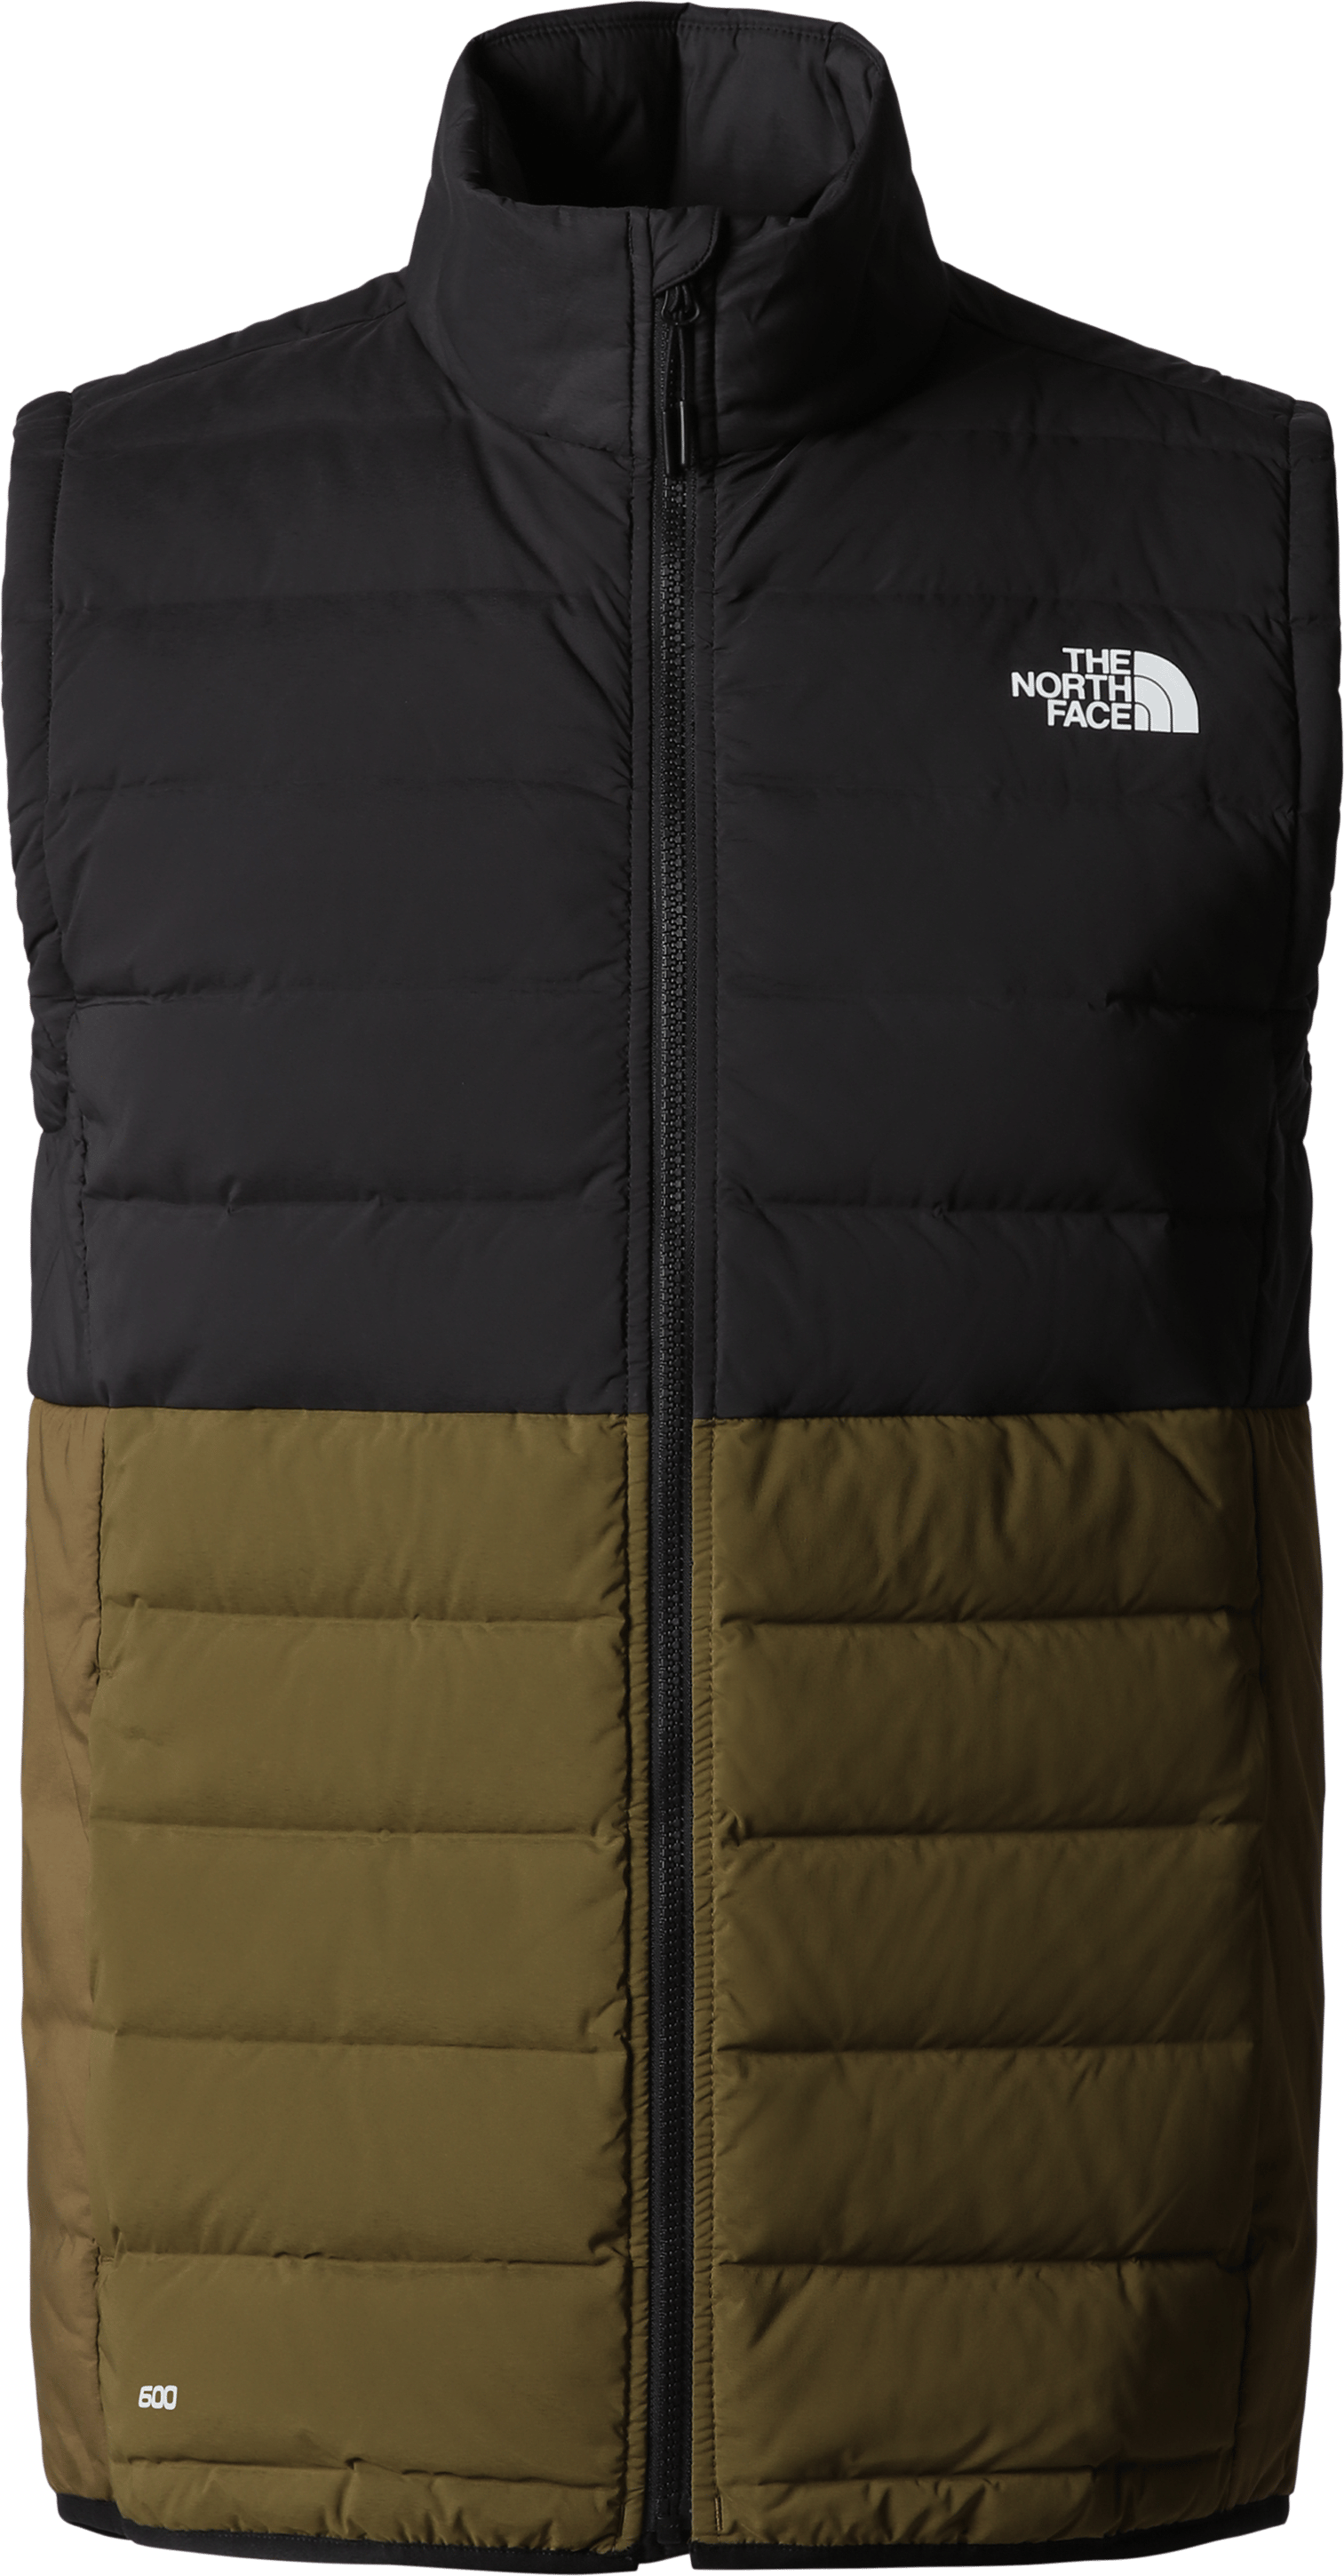 The North Face Men's Belleview Stretch Down Gilet Tnf Black/Military Olive